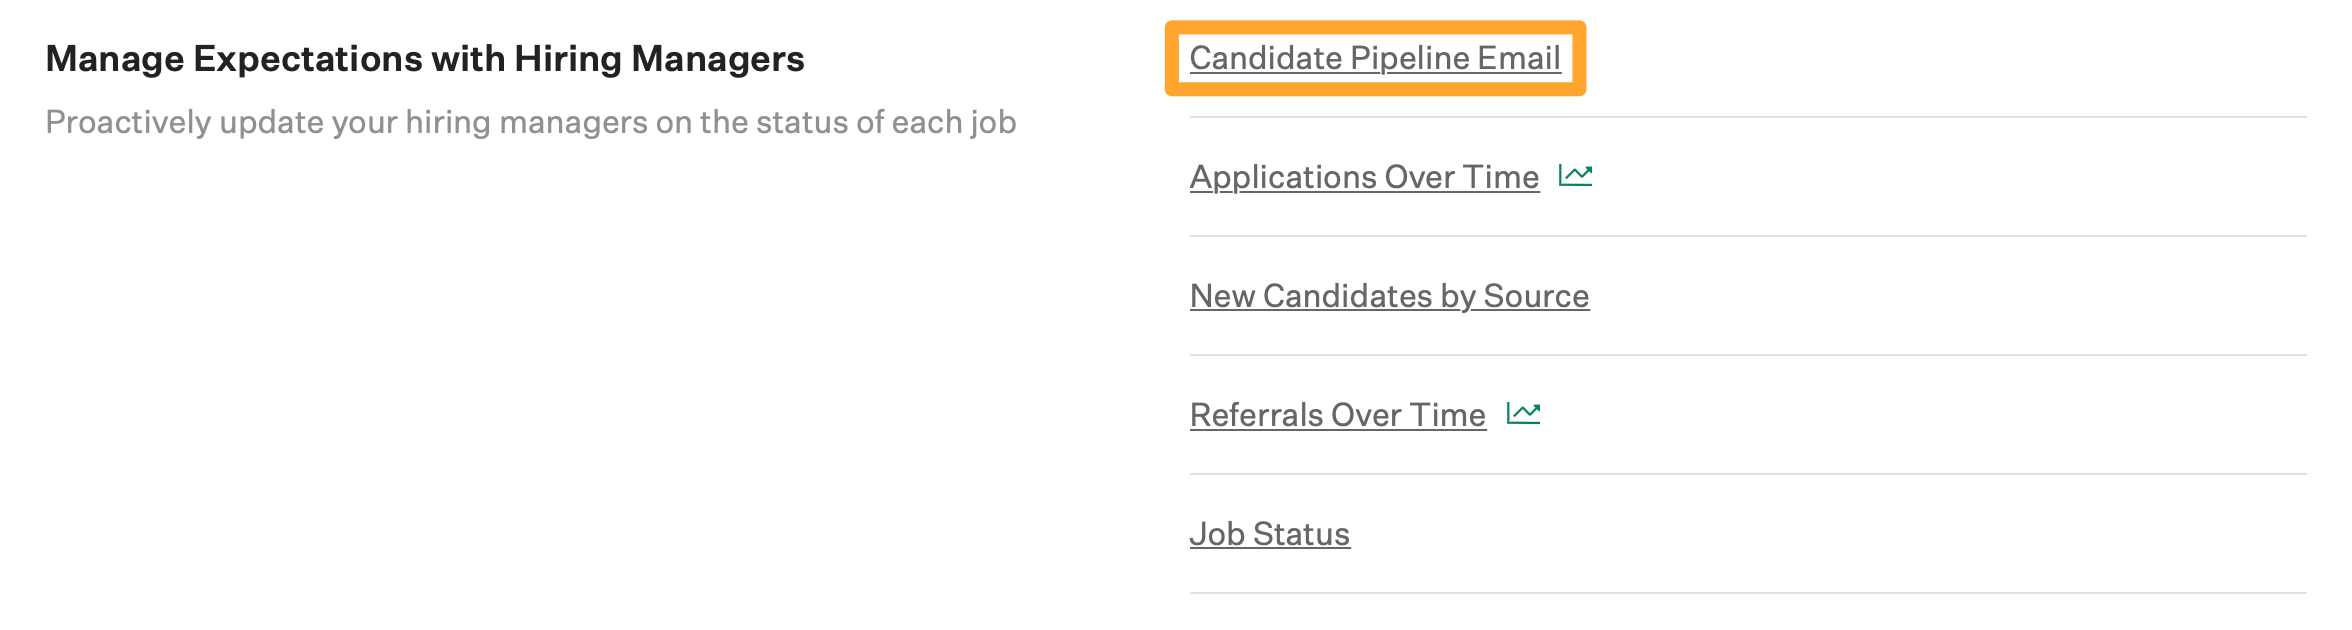 Screenshot of an example candidate pipeline email report